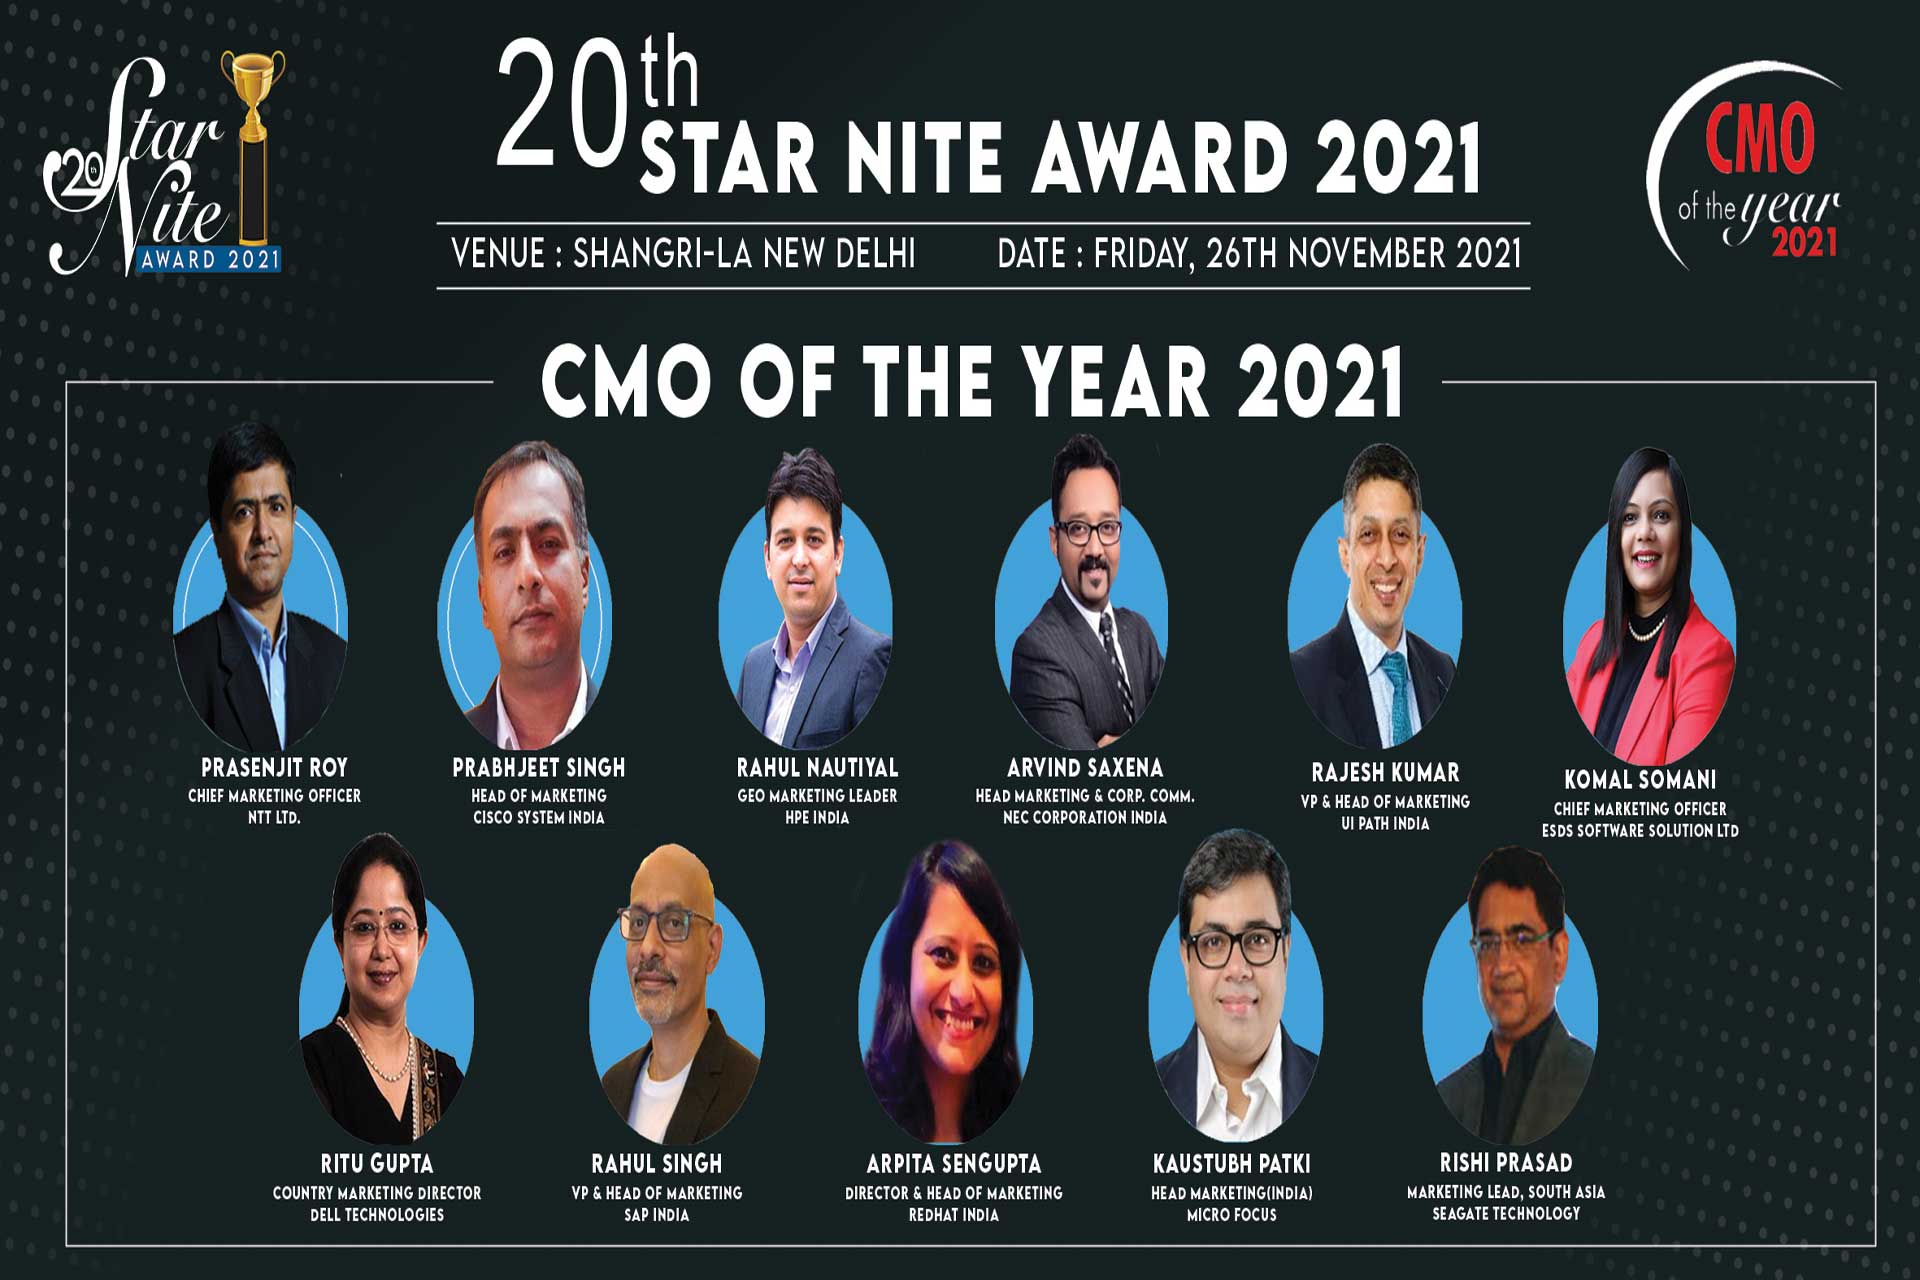 Panel Discussion Session - CMO at 20th Star Nite Awards 2021